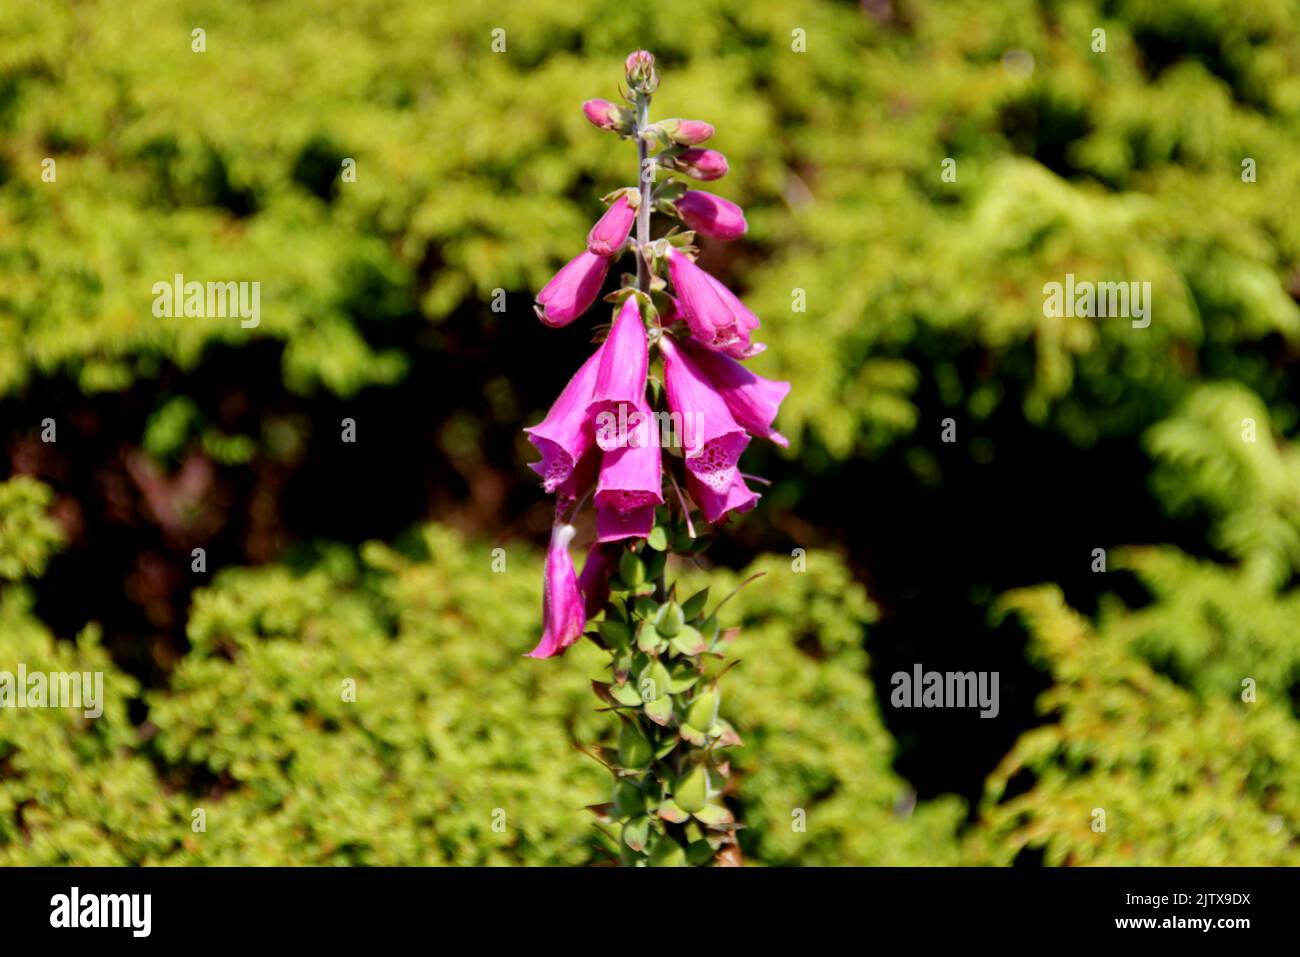 Pink foxglove, wild flowers in the field, on blurred green foliage background, Sao Miguel Island, Azores, Portugal Stock Photo